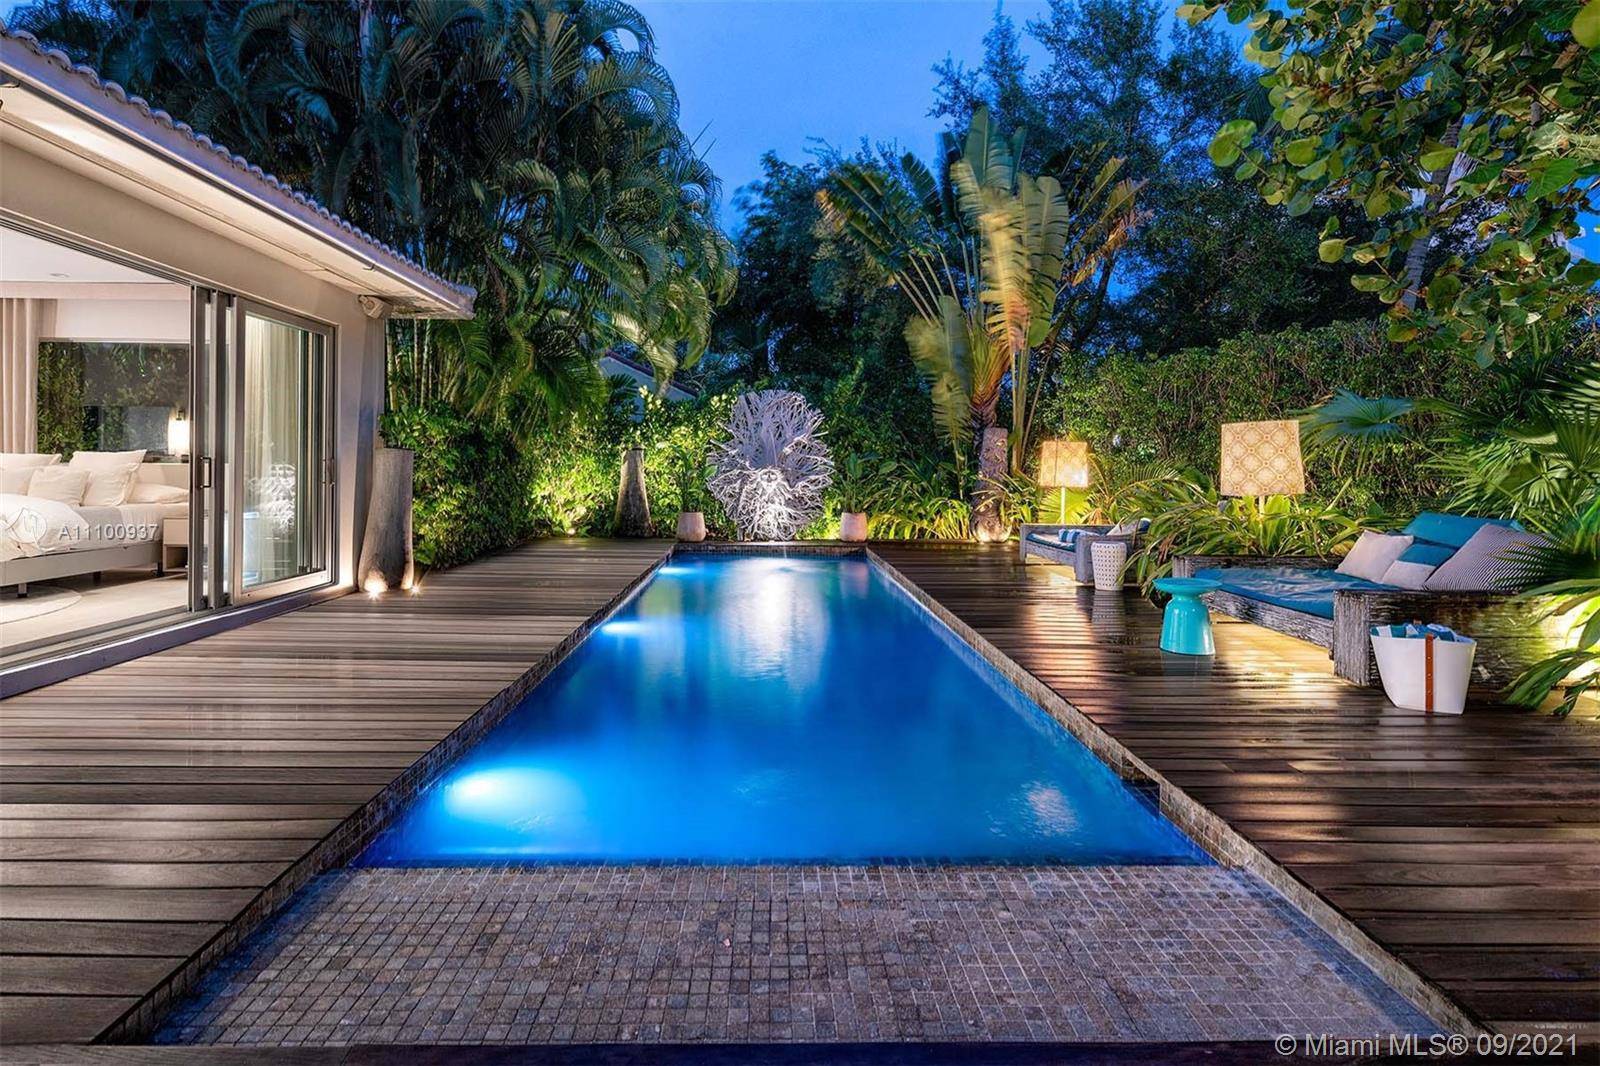 Welcome to this one of a kind private beach home only a short stroll away from the ocean, scenic boardwalk, the famous Lincoln Road, as well as many great restaurants ...